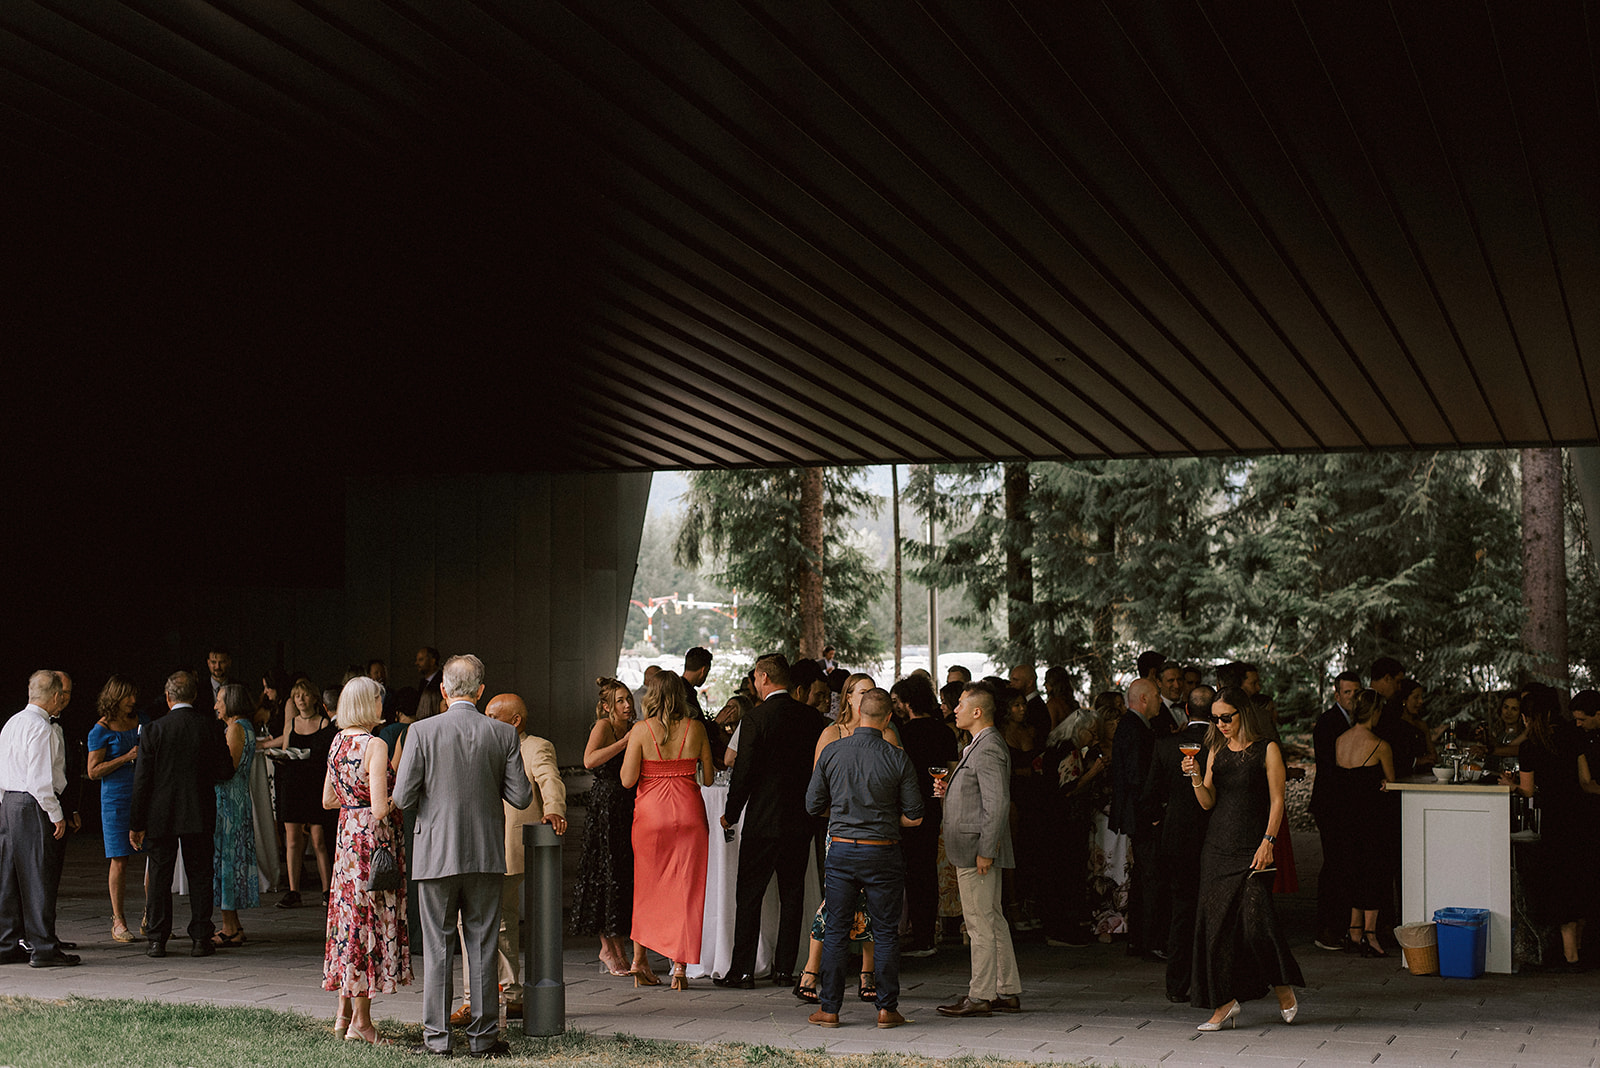 Vancouver wedding photographer captures photos of couple having their wedding at Audain Art Museum in Whistler